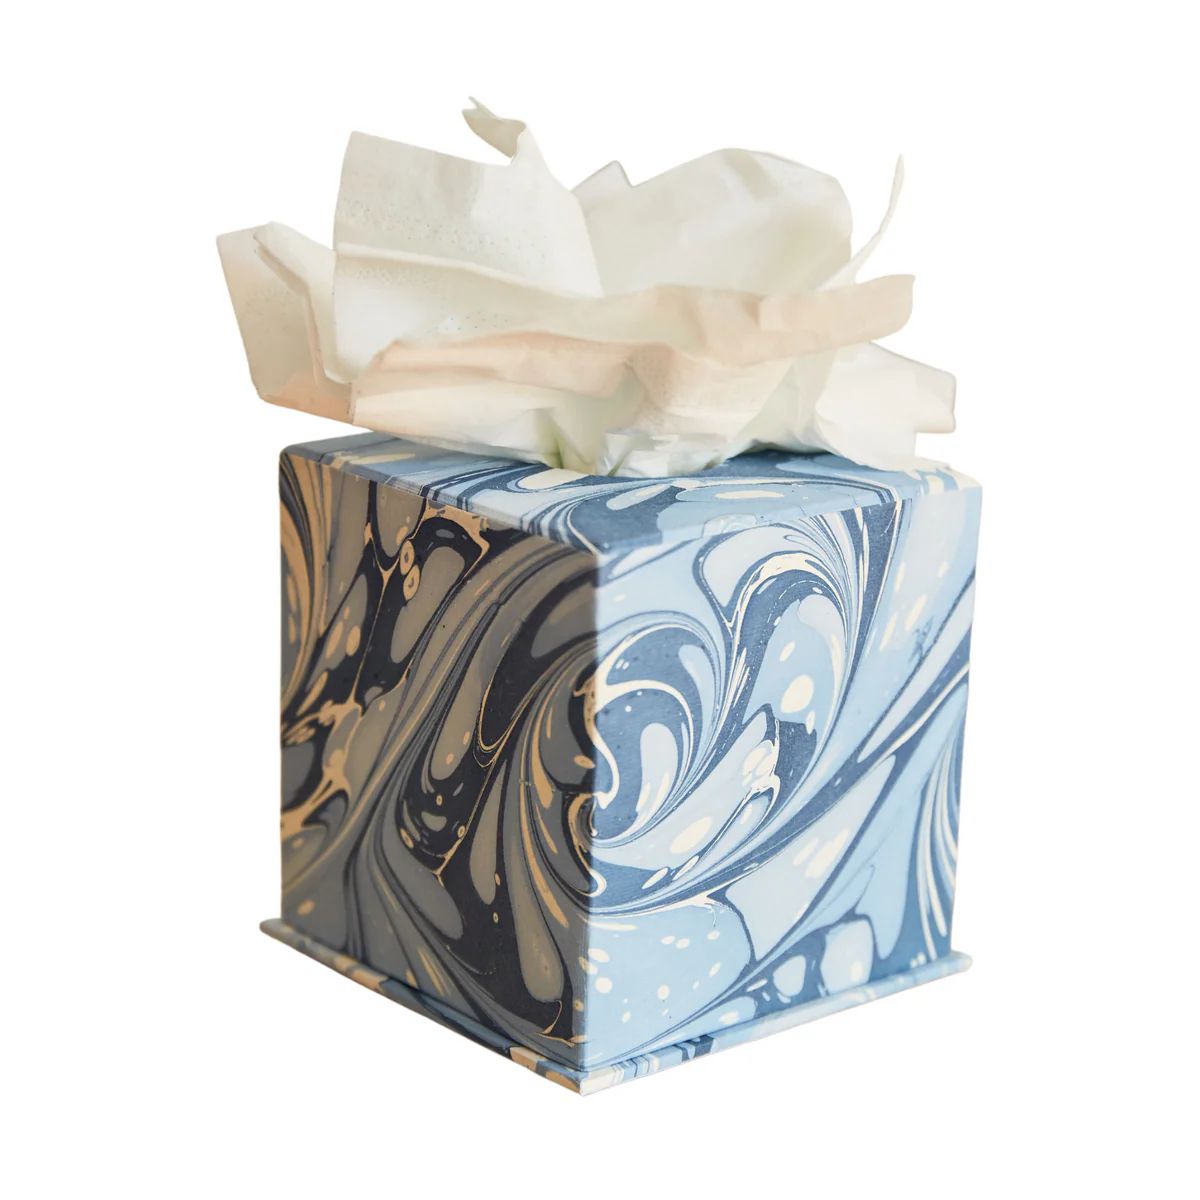 Blue Swirl Tissue Box Cover | Over The Moon